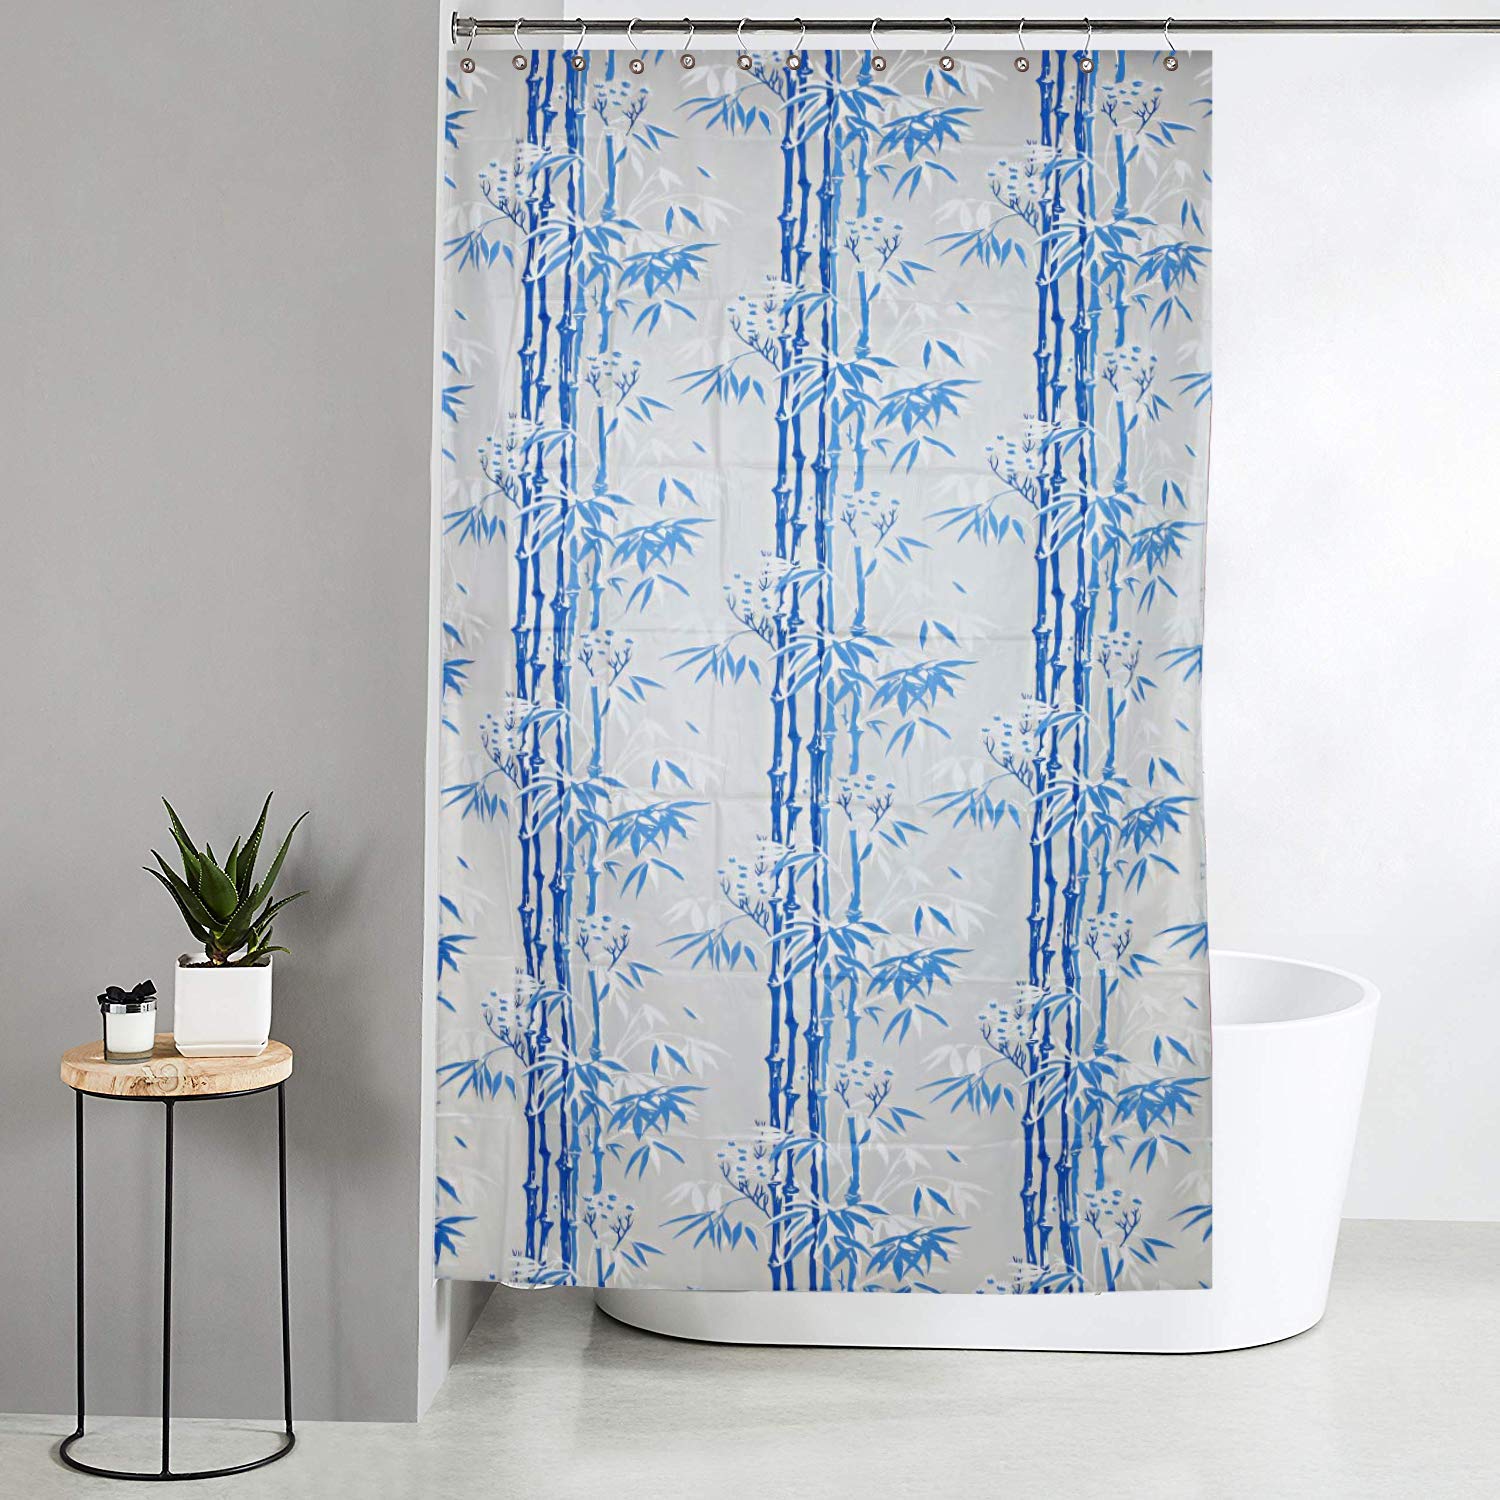 Kuber Industries Bamboo Design Waterproof PVC Shower Curtain with 8 Hooks 54 inch x 84 inch (Blue) CTKTC33775